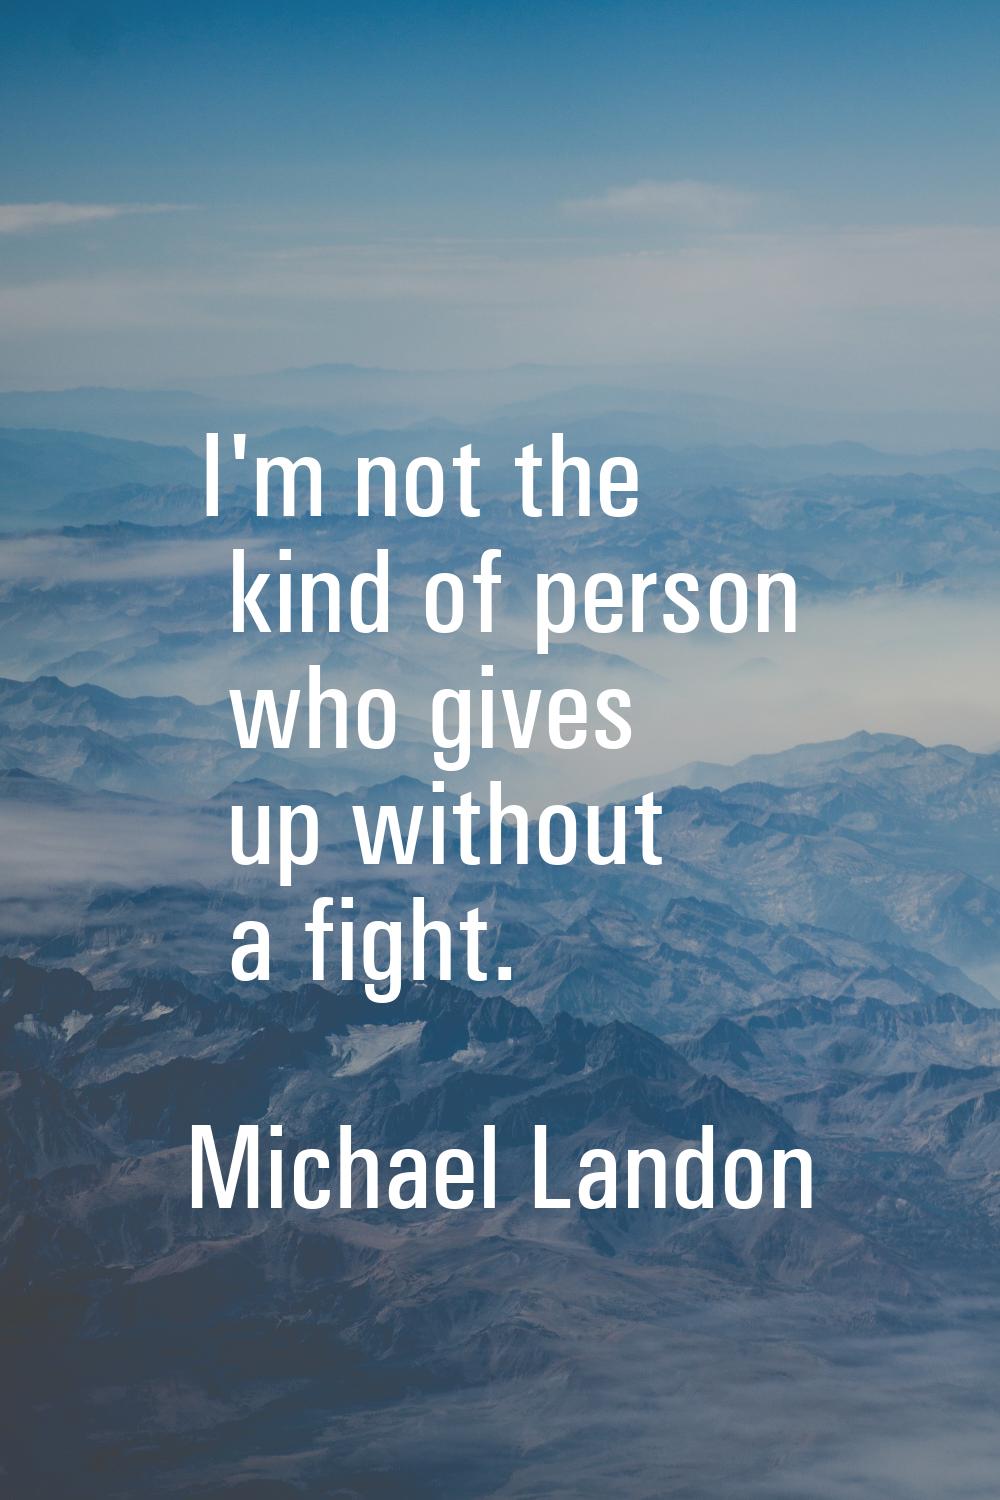 I'm not the kind of person who gives up without a fight.